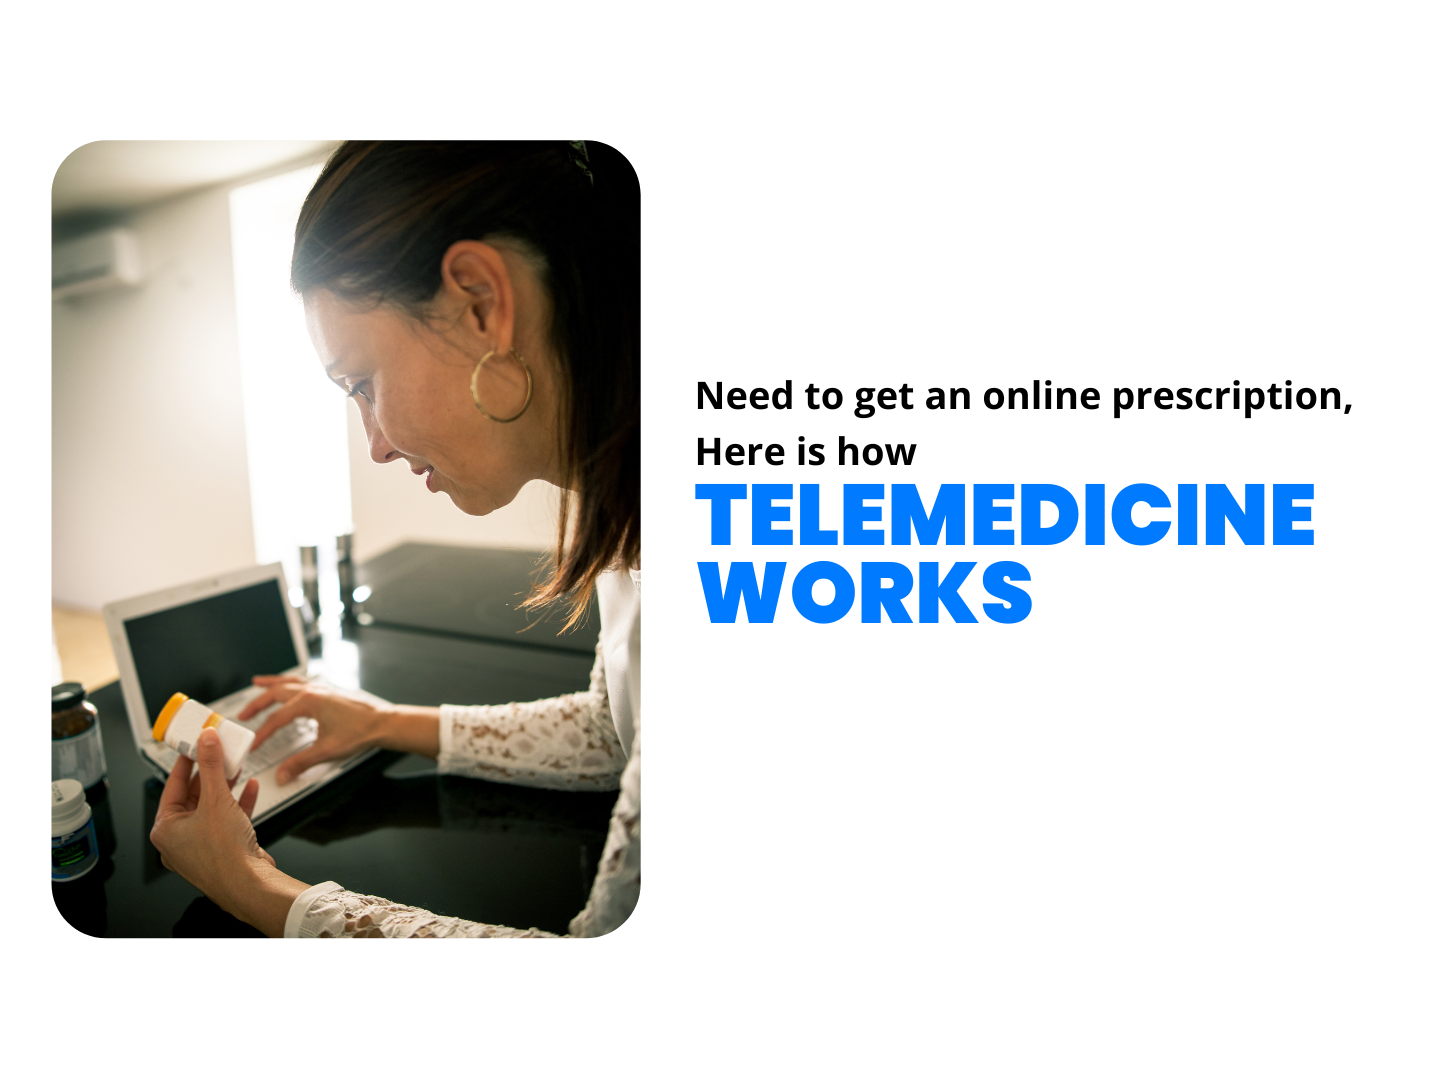 Need to Get a Prescription Online? Here’s How Telemedicine Can Help